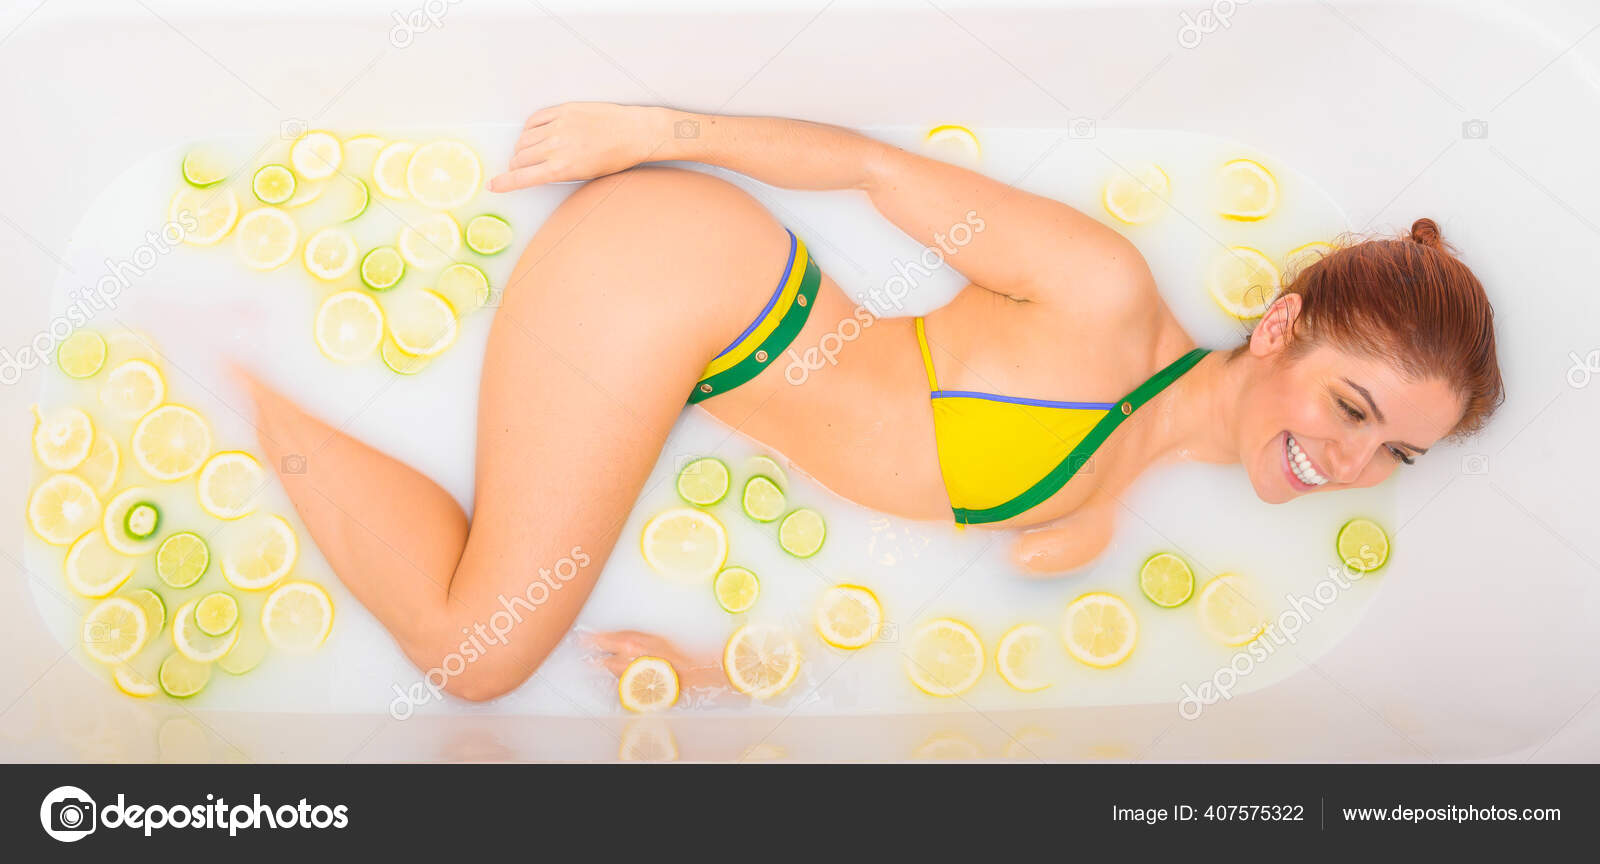 Beautiful redhead woman takes a milk bath with lemon and lime slices. Skin care and whitening photo photo picture